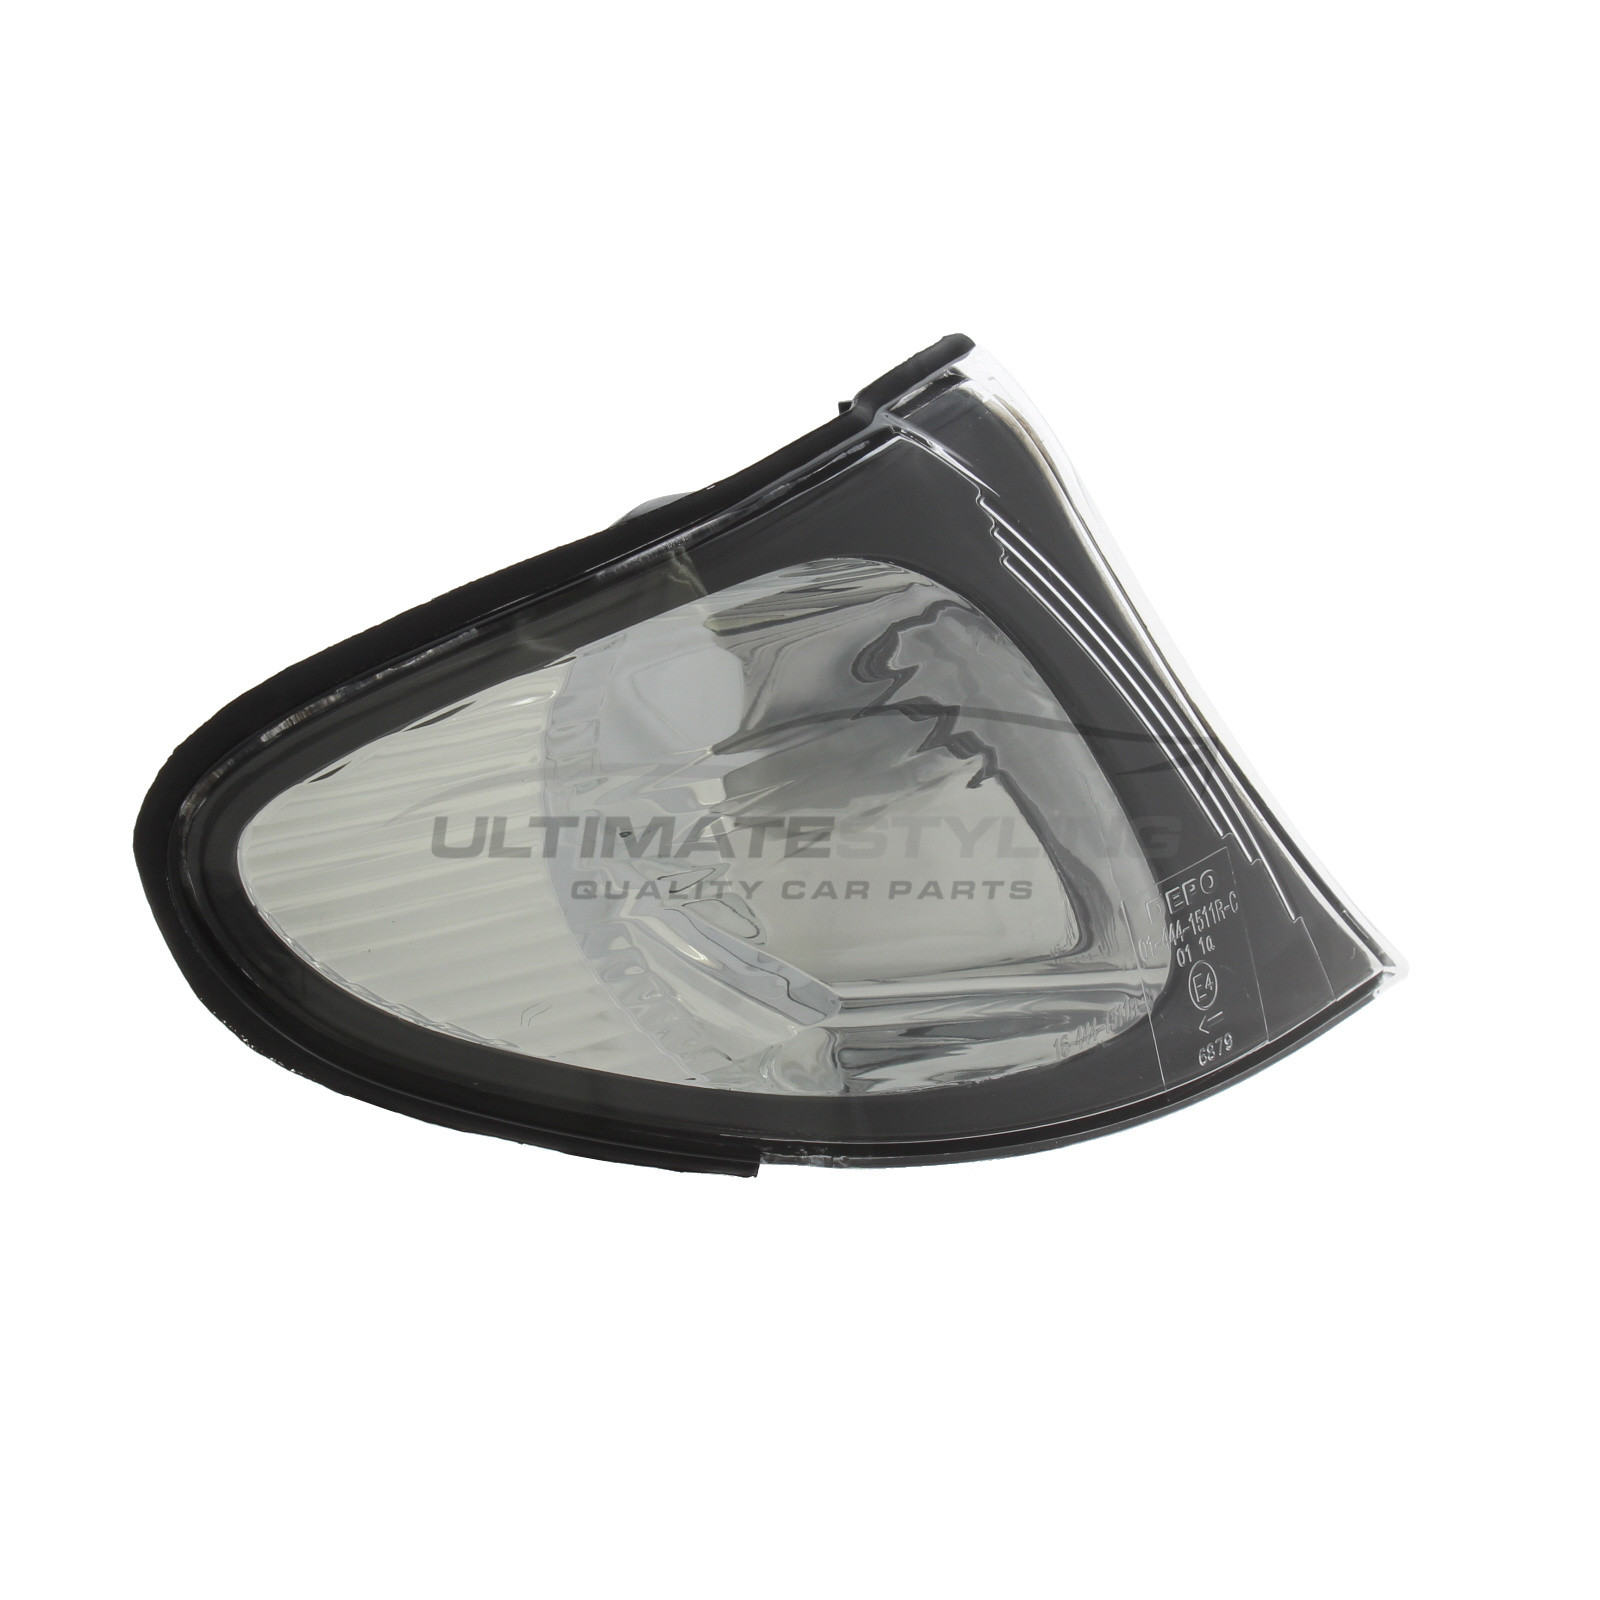 Replaces BM2556101 BM2557101 Fits 2001 2002 2003 BMW 330Ci Reflector Assembly Driver and Passenger Side DOT Certified Vehicle Trim: Convertible; To 03/2003 ; Coupe; To 03/2003 CarLights360 